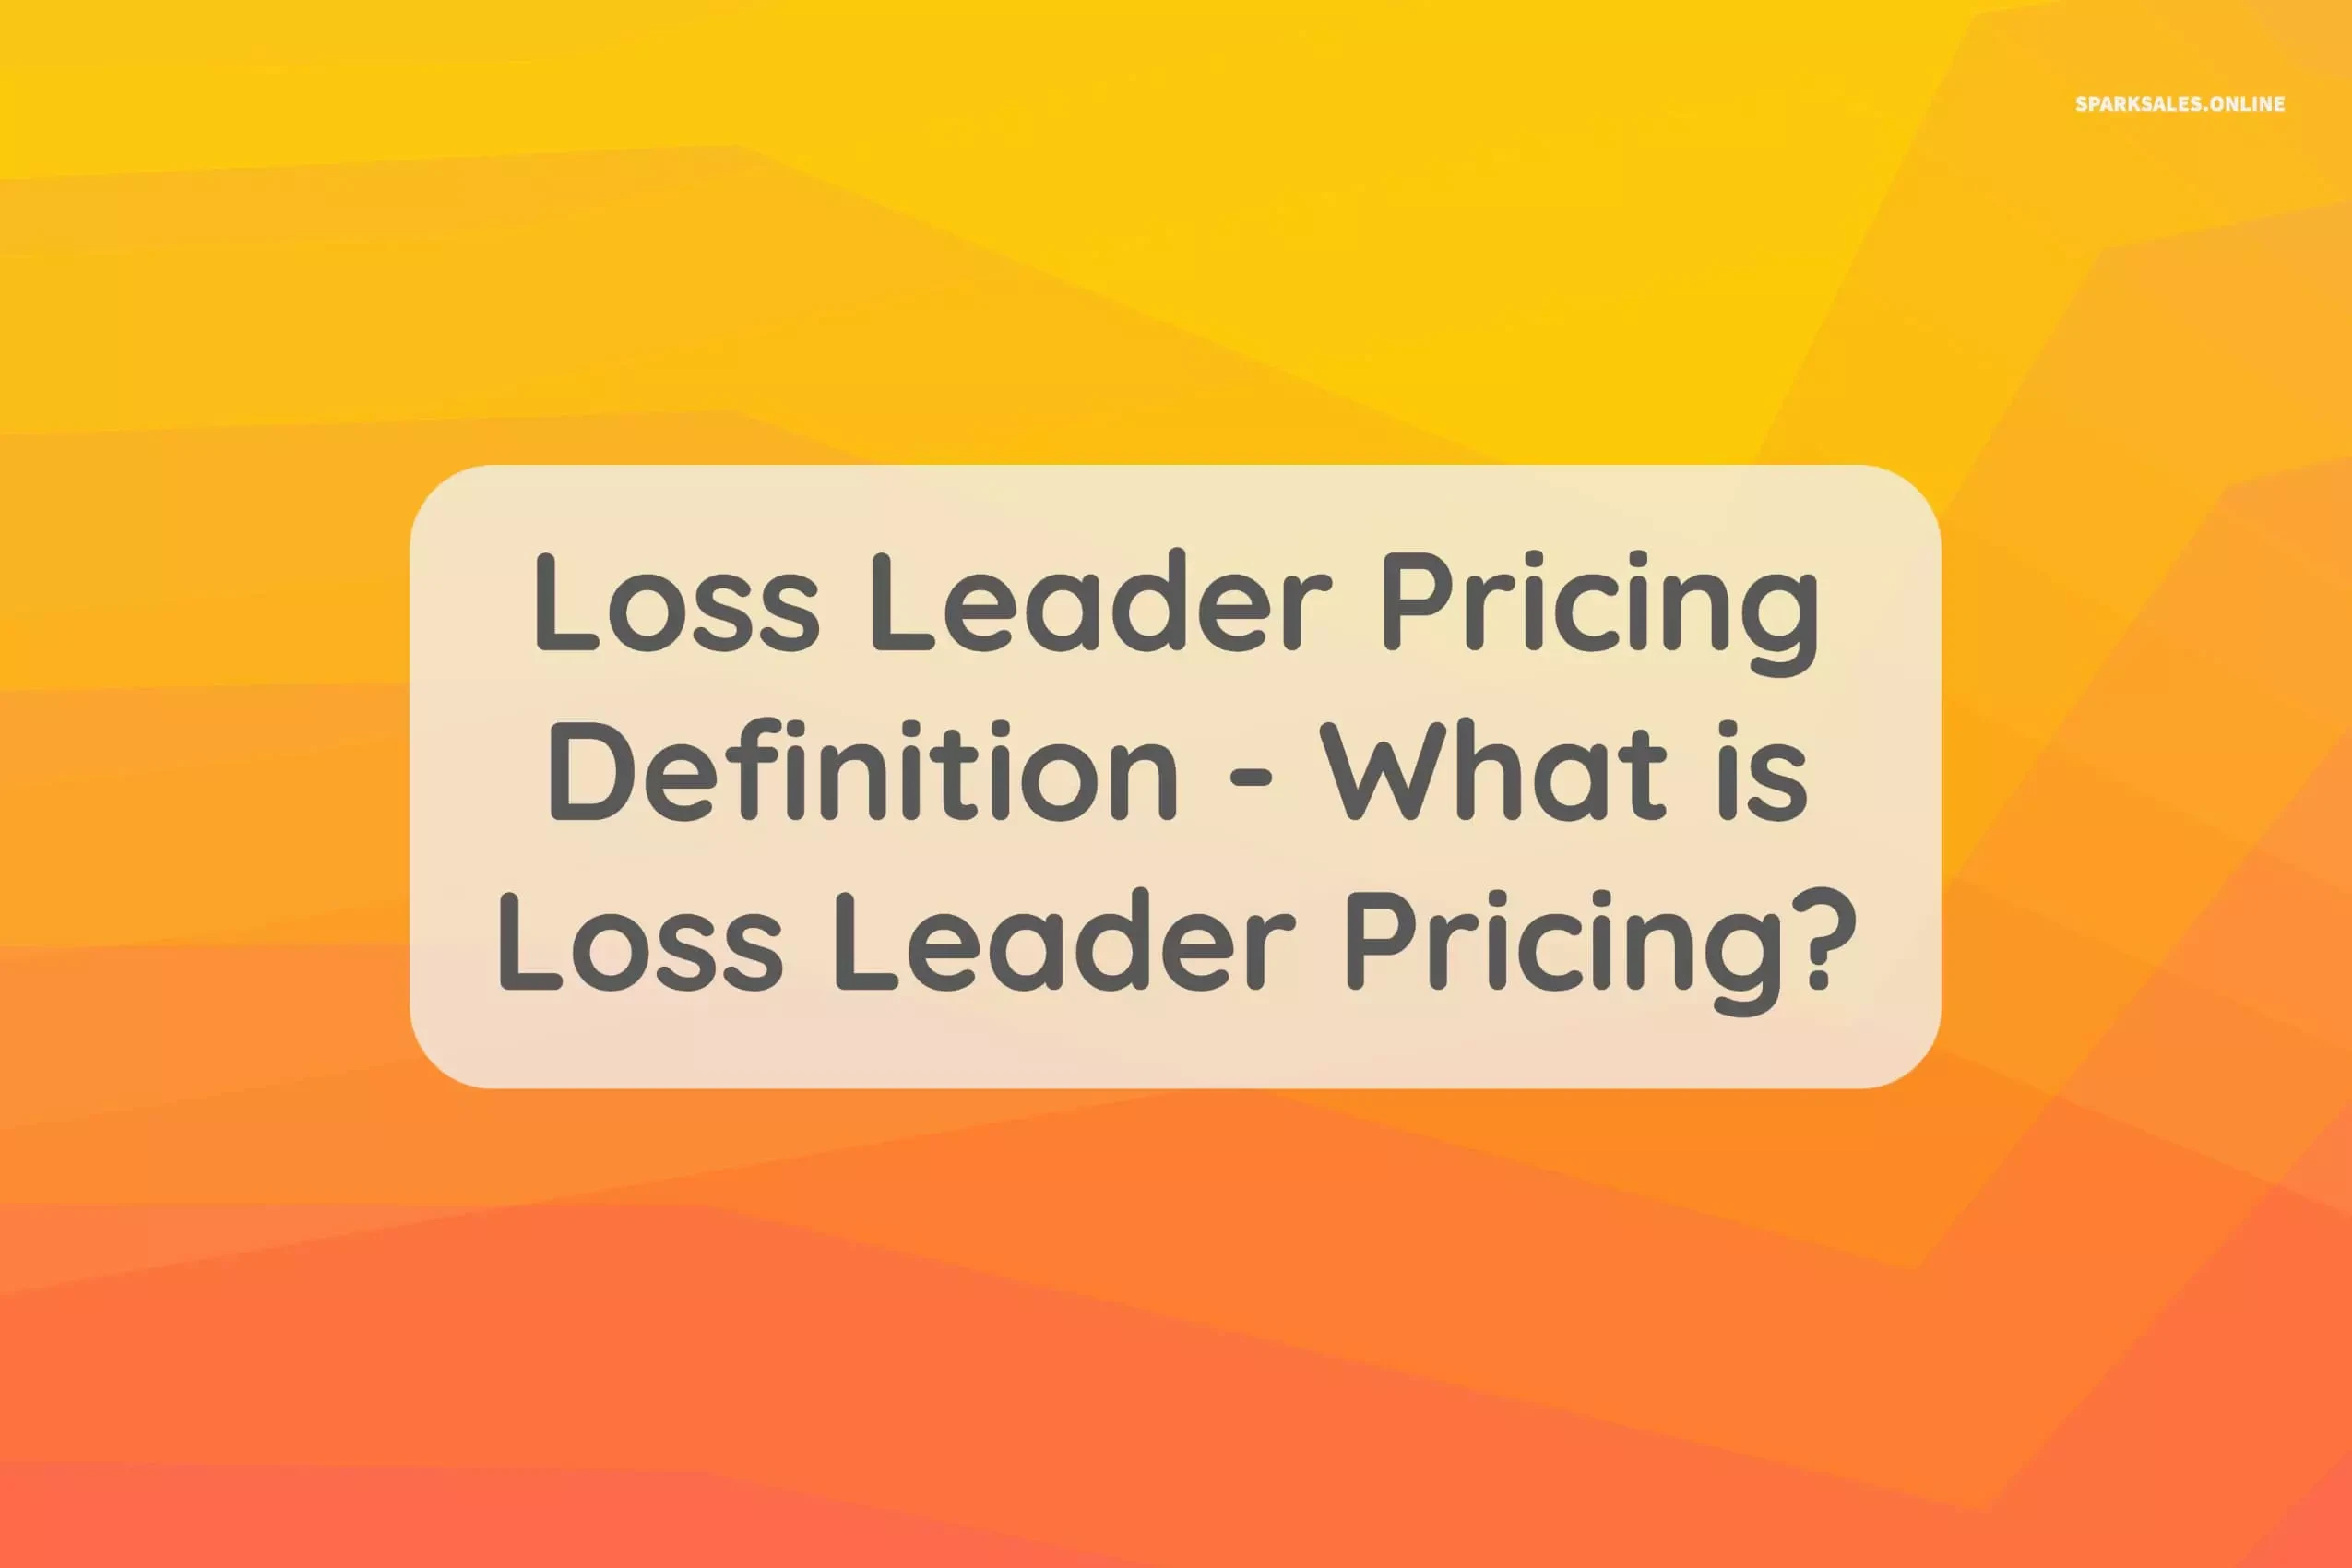 Loss Leader Pricing Definition - What is Loss Leader Pricing